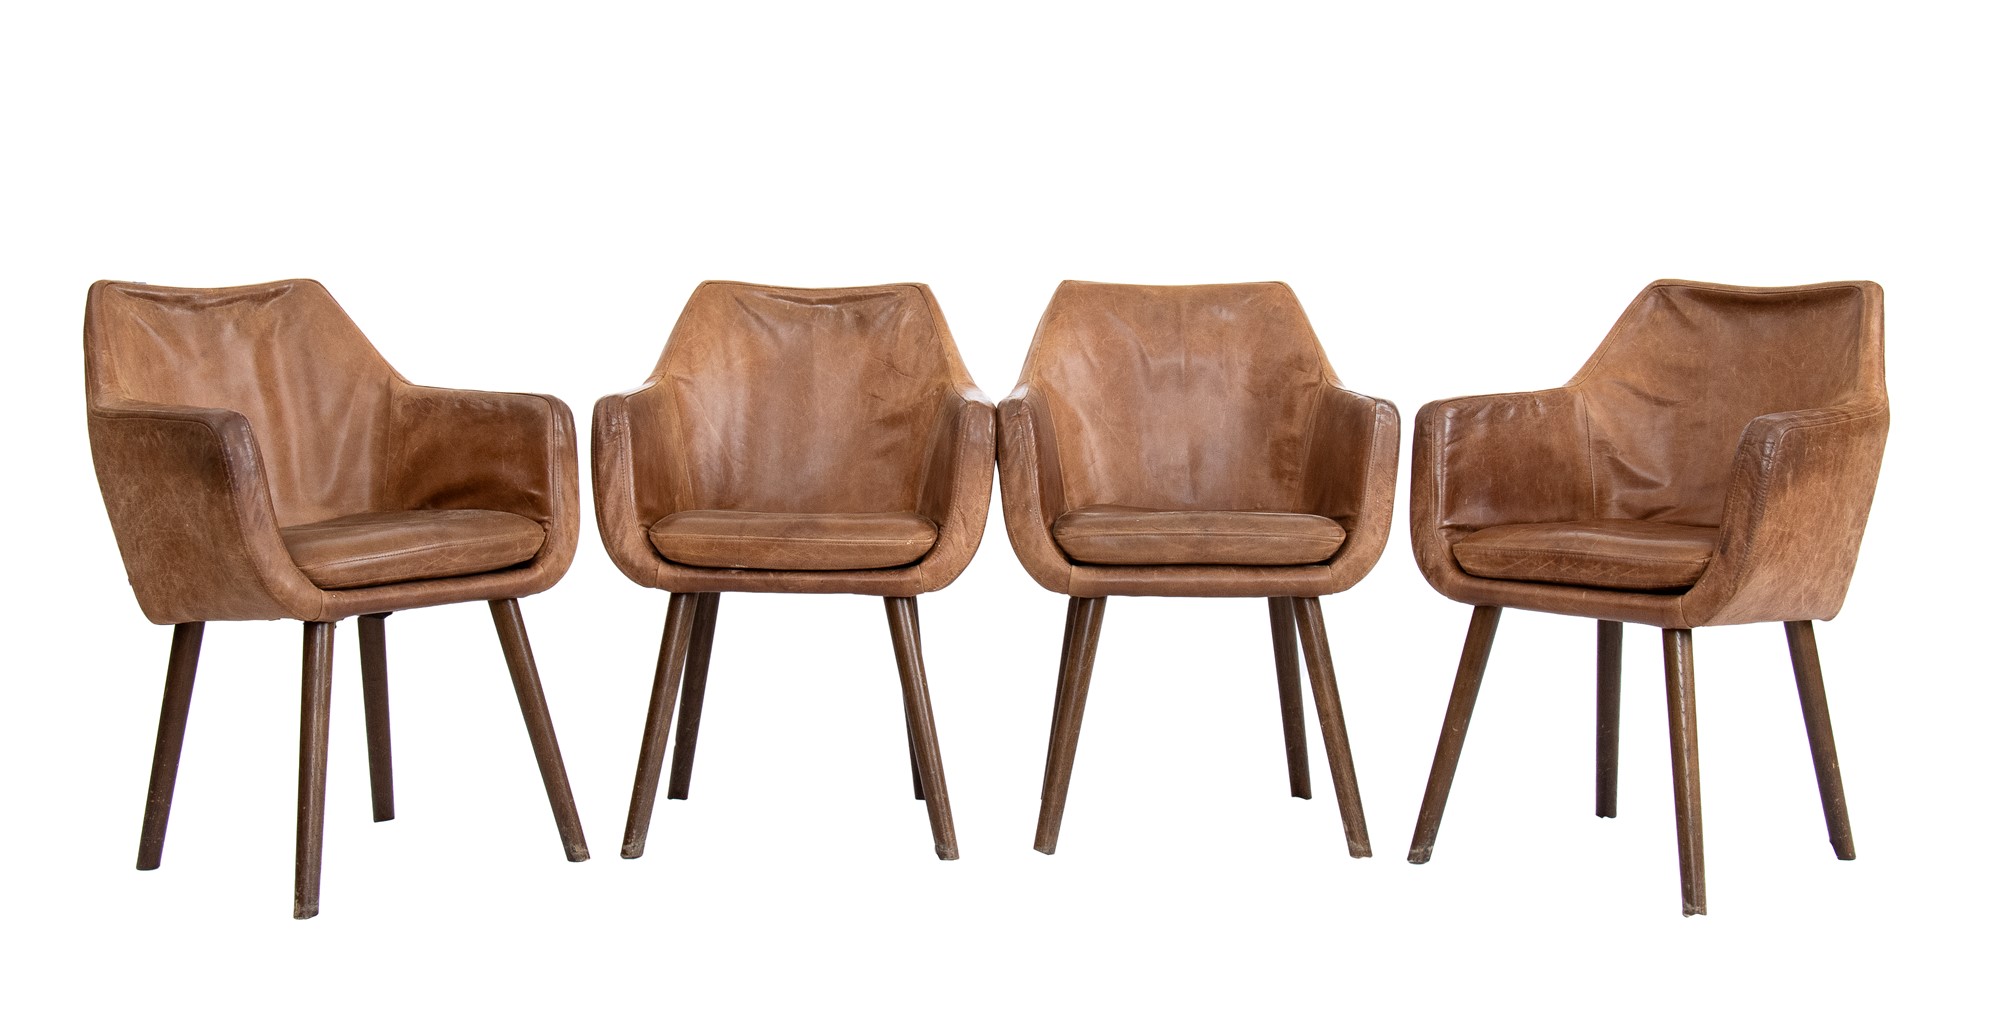 4 leather chairs. 20th century English manufacture - Image 3 of 19